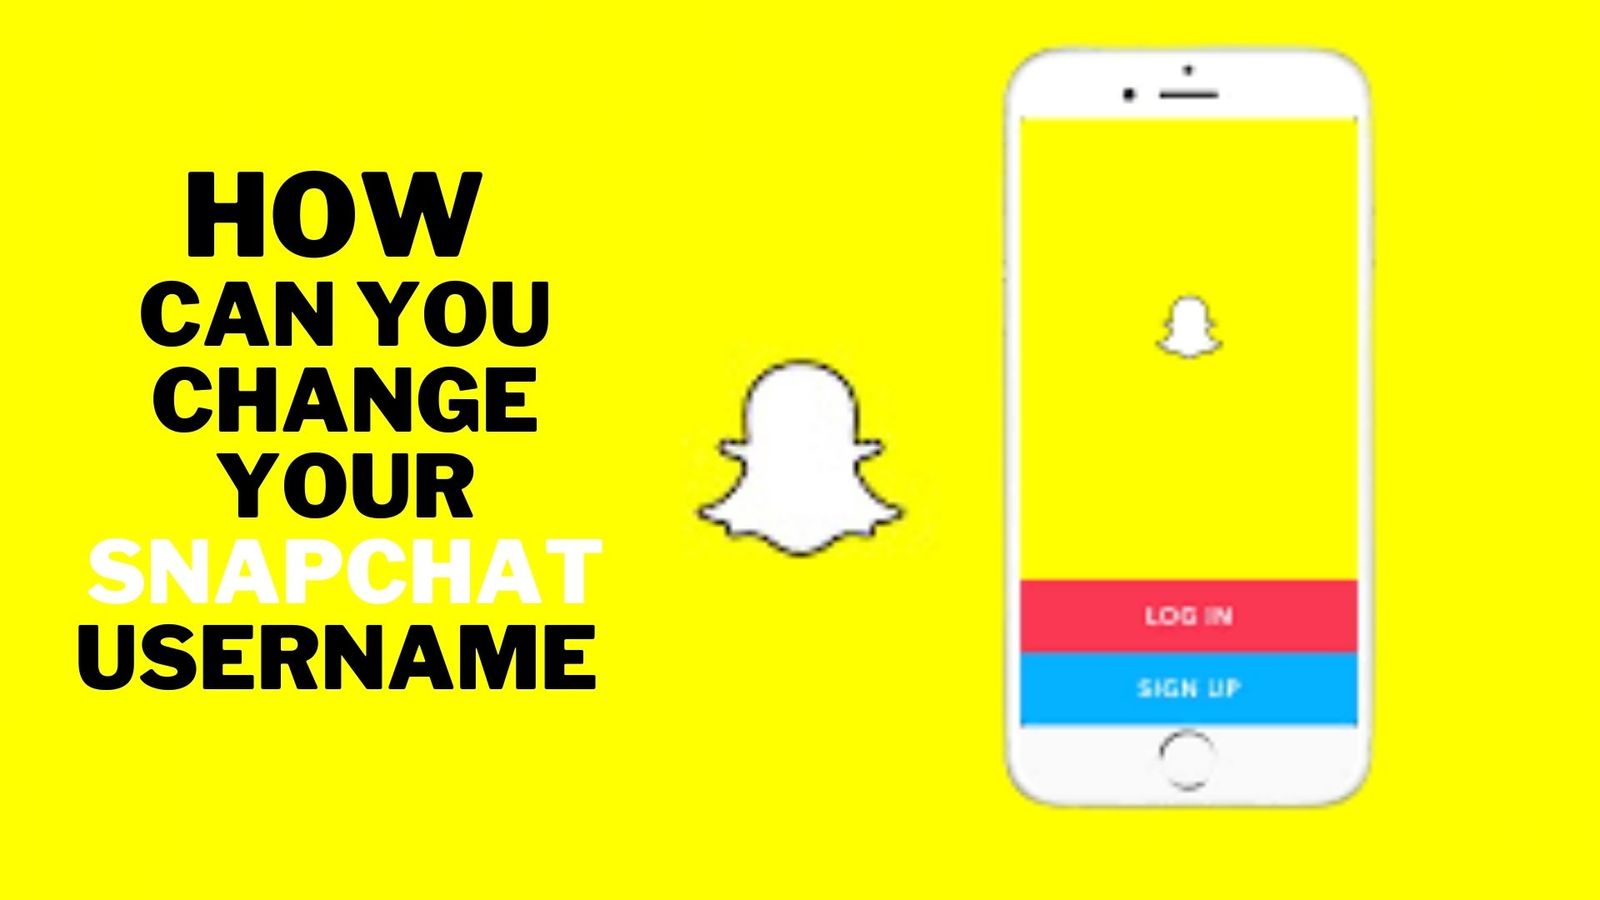 can i change my snapchat username, can snapchat username be changed, can u change snapchat username, can you change your snapchat username, change my snapchat username, change snapchat name, change snapchat user name, change snapchat username, change snapchat username 2022, change snapchat username jailbreak, change your snapchat username, edit snapchat username, how can i change my username on snapchat, how can i change username on snapchat, how can u change your username on snapchat, How Can You Change Your Snapchat Username in 2022, how can you change your username on snapchat, how do i change my username on snapchat, how do i find my snapchat username, how do u change your username on snapchat, how do you change your username on snapchat, how to change a username on snapchat, how to change my snapchat username, how to change snapchat username 2022, how to change the username on snapchat, how to change your snap username, how to change your user on snapchat, how to change your username on snapchat, how to edit snapchat username, how to edit username on snapchat, how to edit your snapchat username, how to find my snapchat username, how to find your snapchat username, reset snapchat password with username, secret way to change snapchat username, what if i forgot my snapchat username, what is my snapchat username, what's my snapchat username